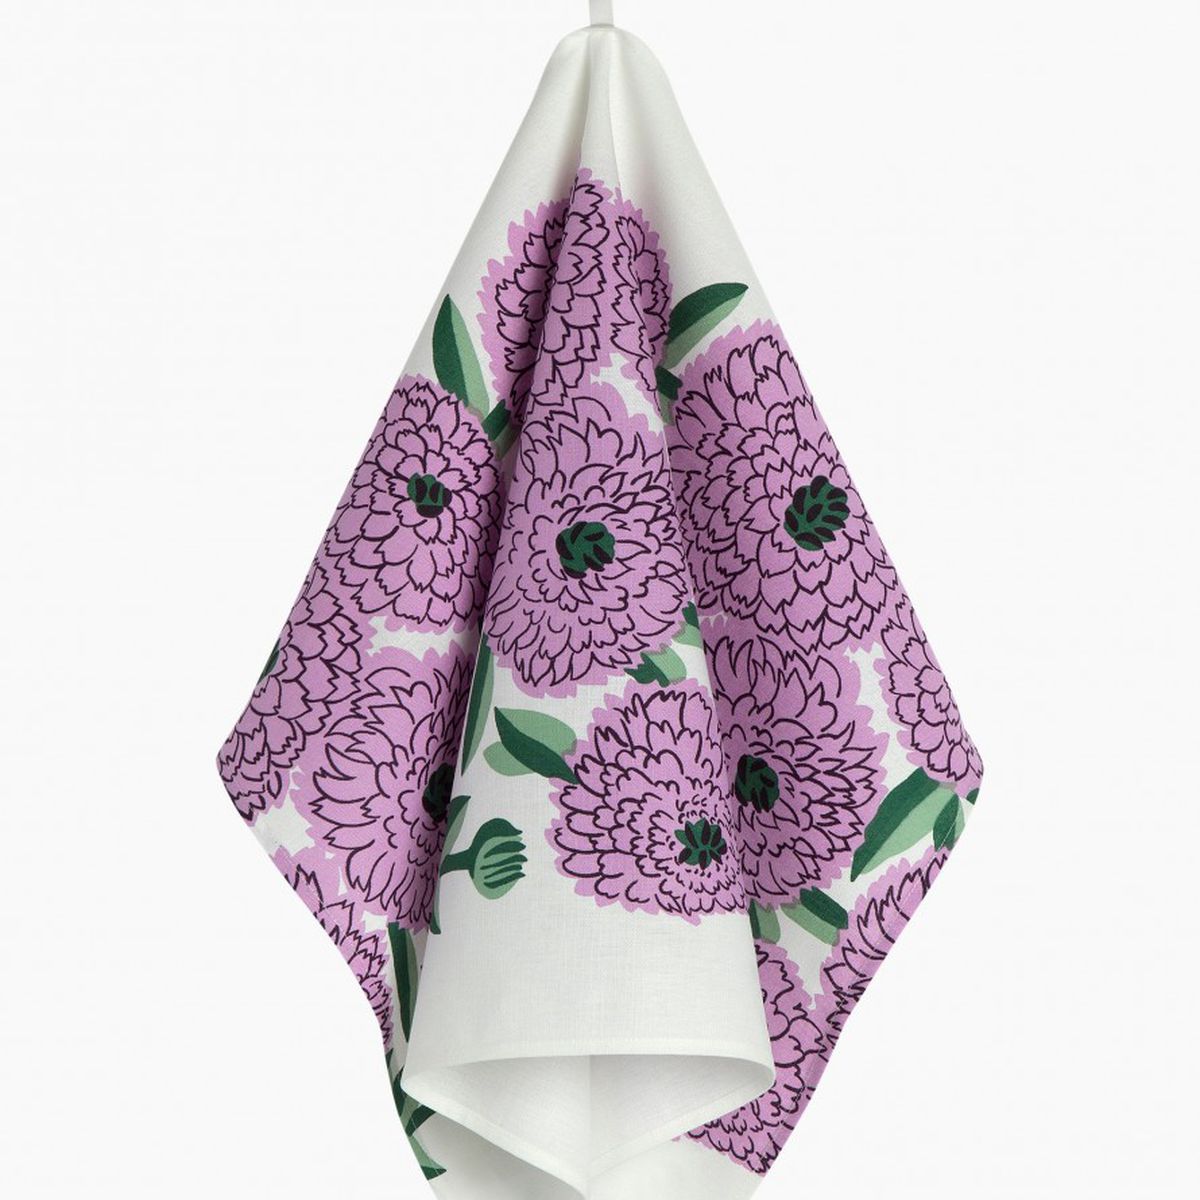 A white tea towel printed with graphic lavender florals